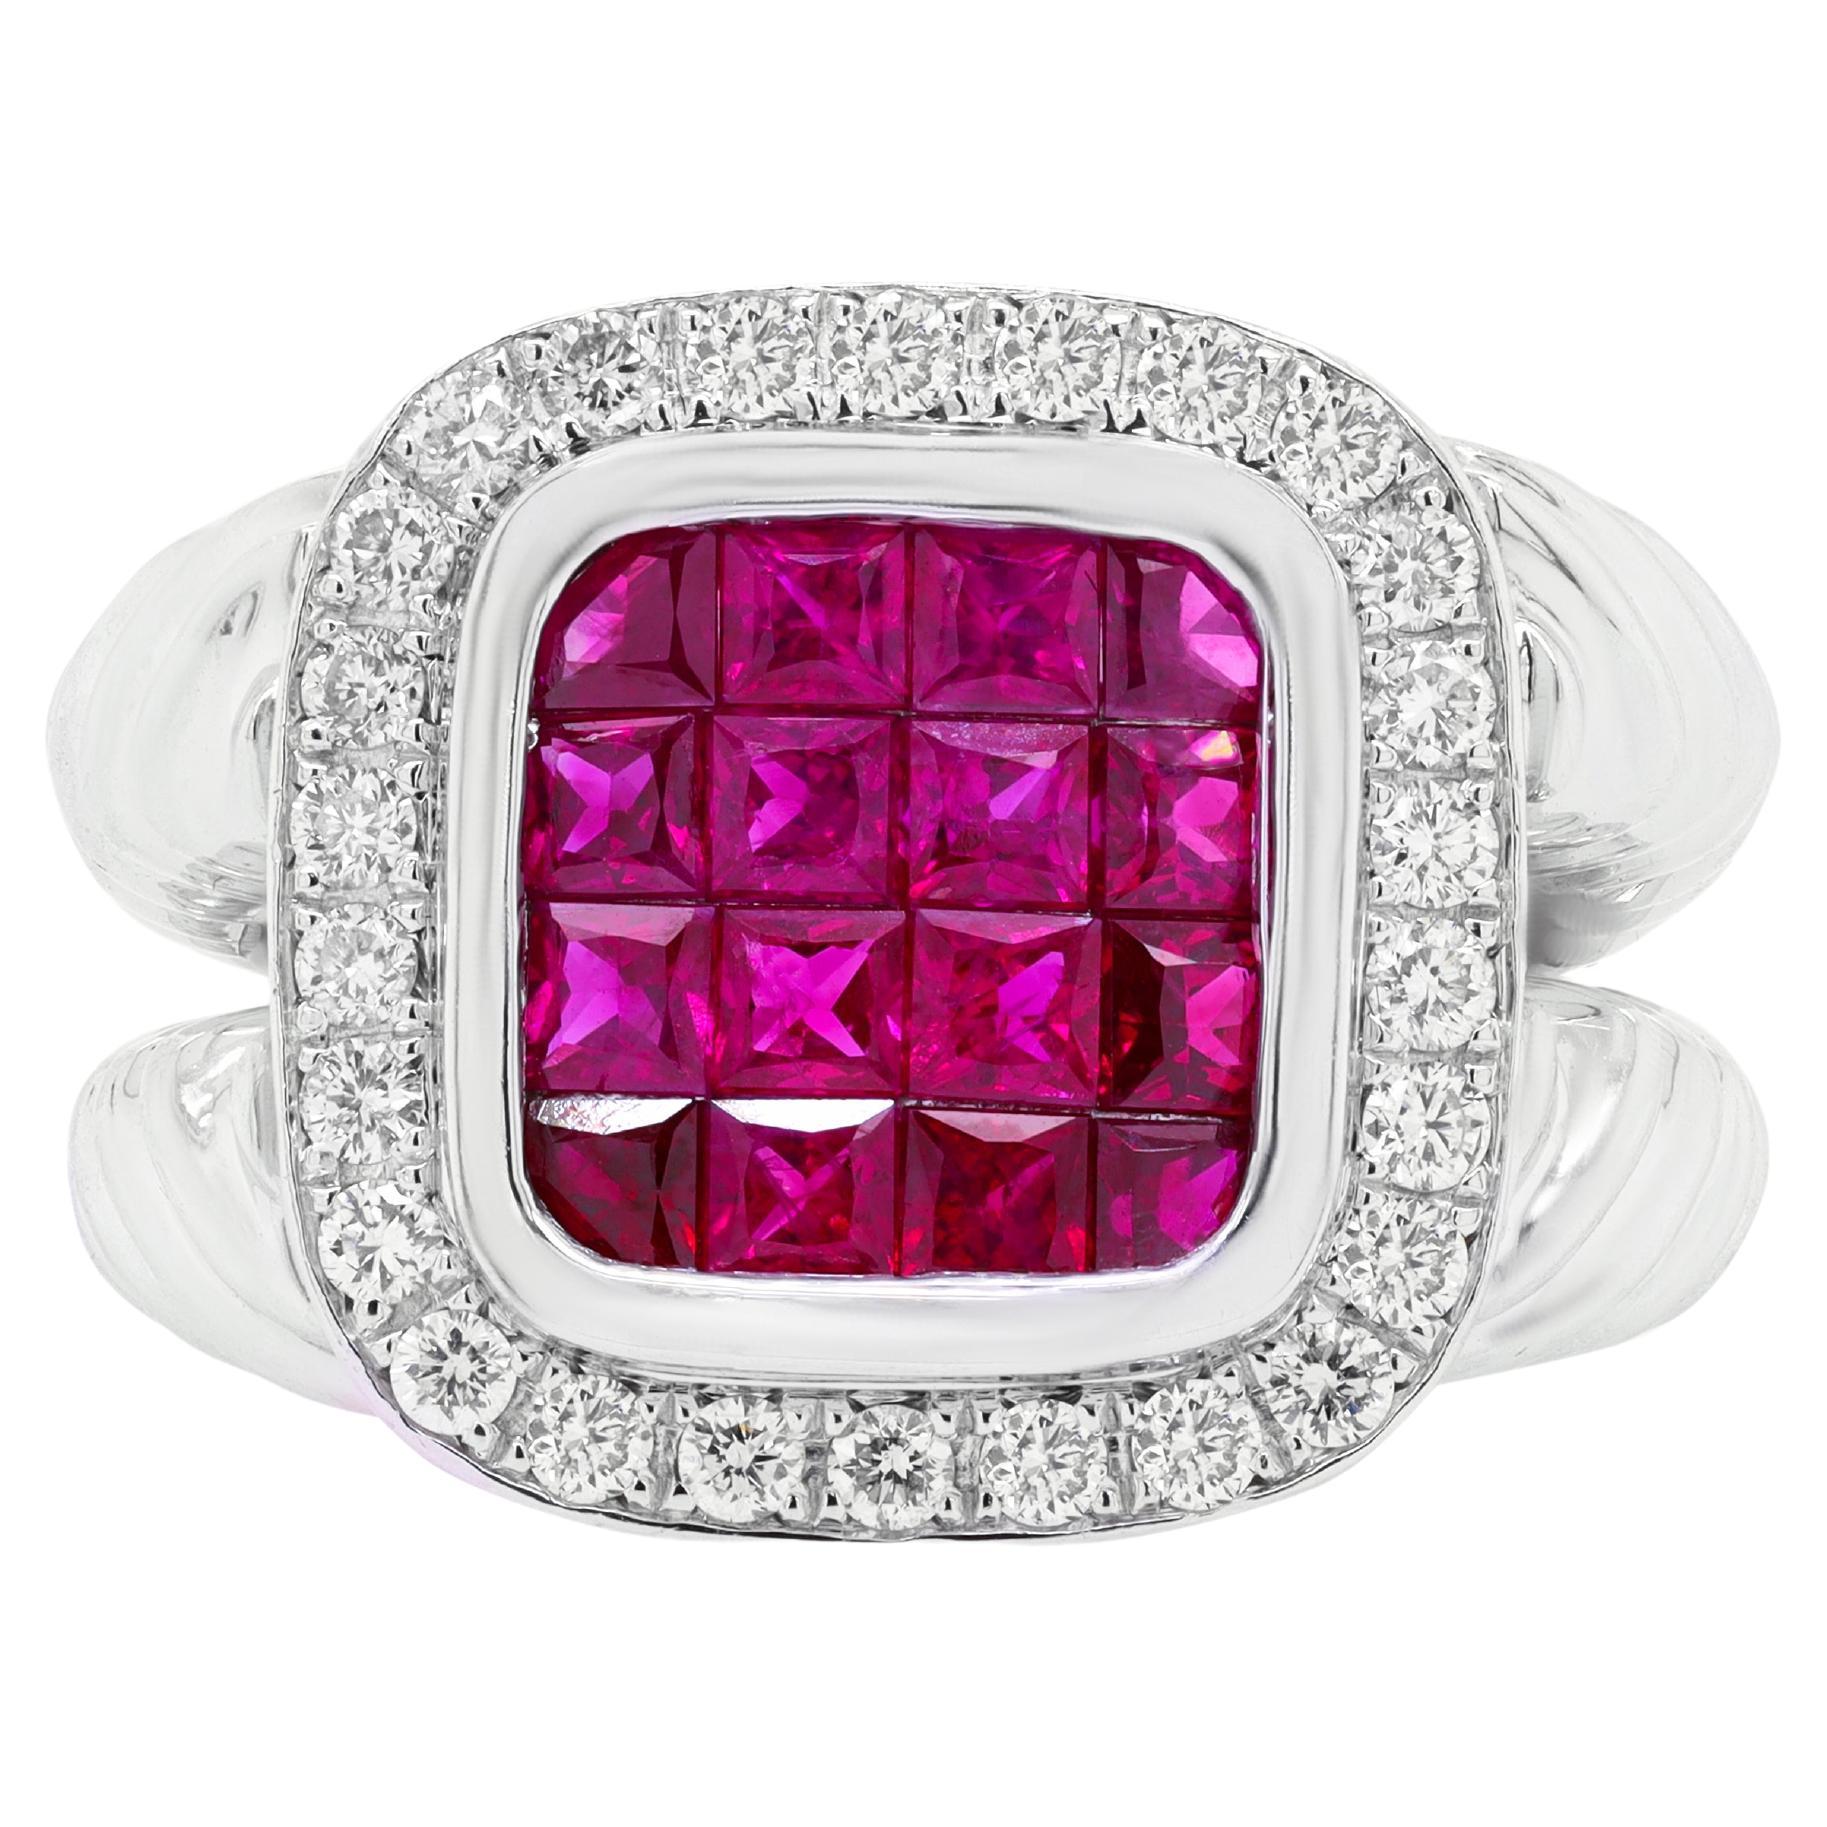 Diana M. 18 kt white gold ruby diamond fashion ring featuring  2.40 cts tw 